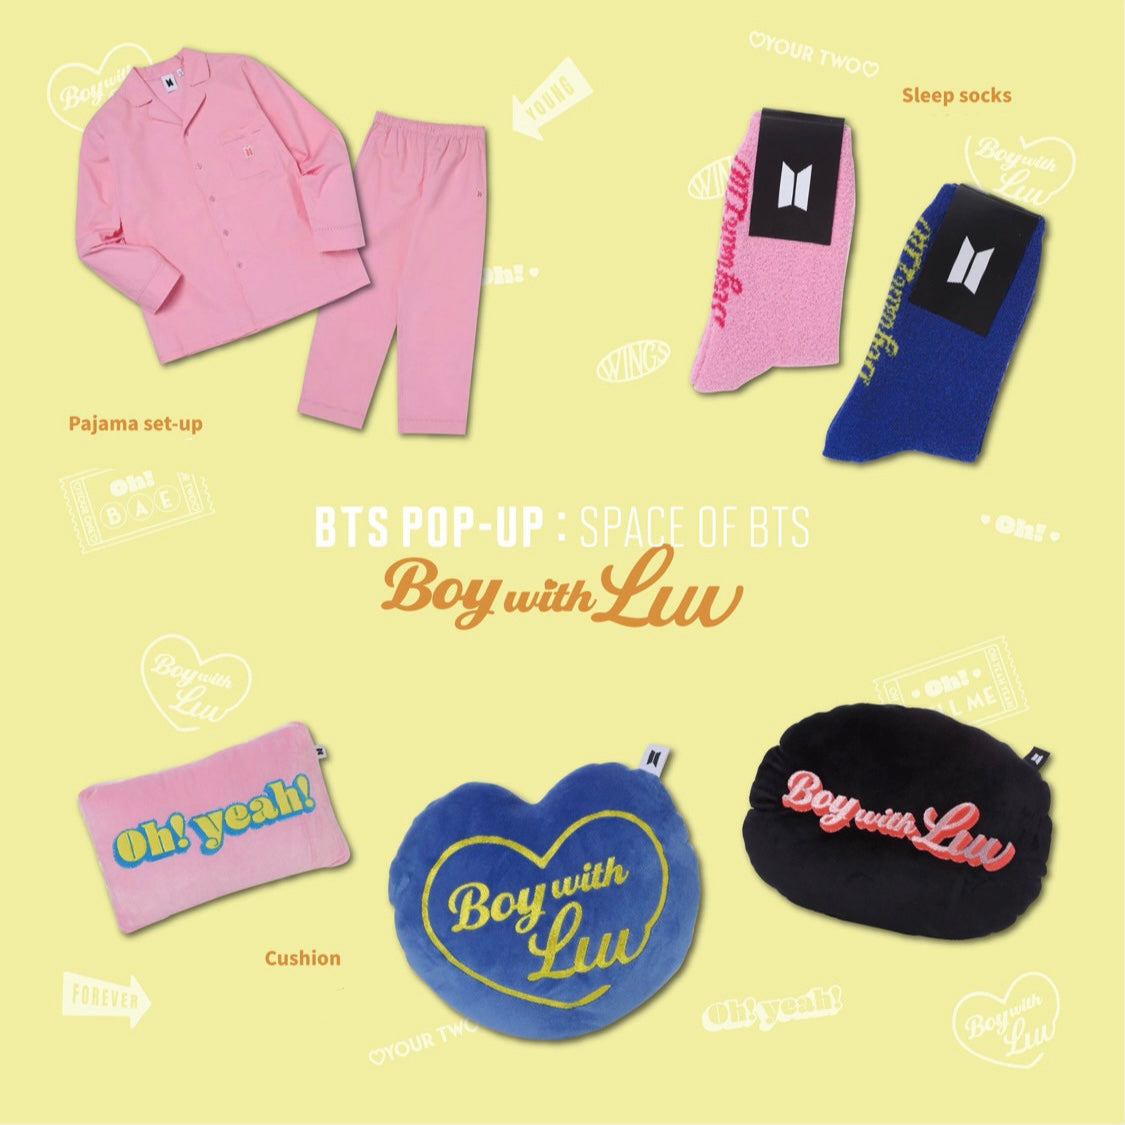 BTS] Pop-Up : Space Of BTS : Boy With Luv – krmerch